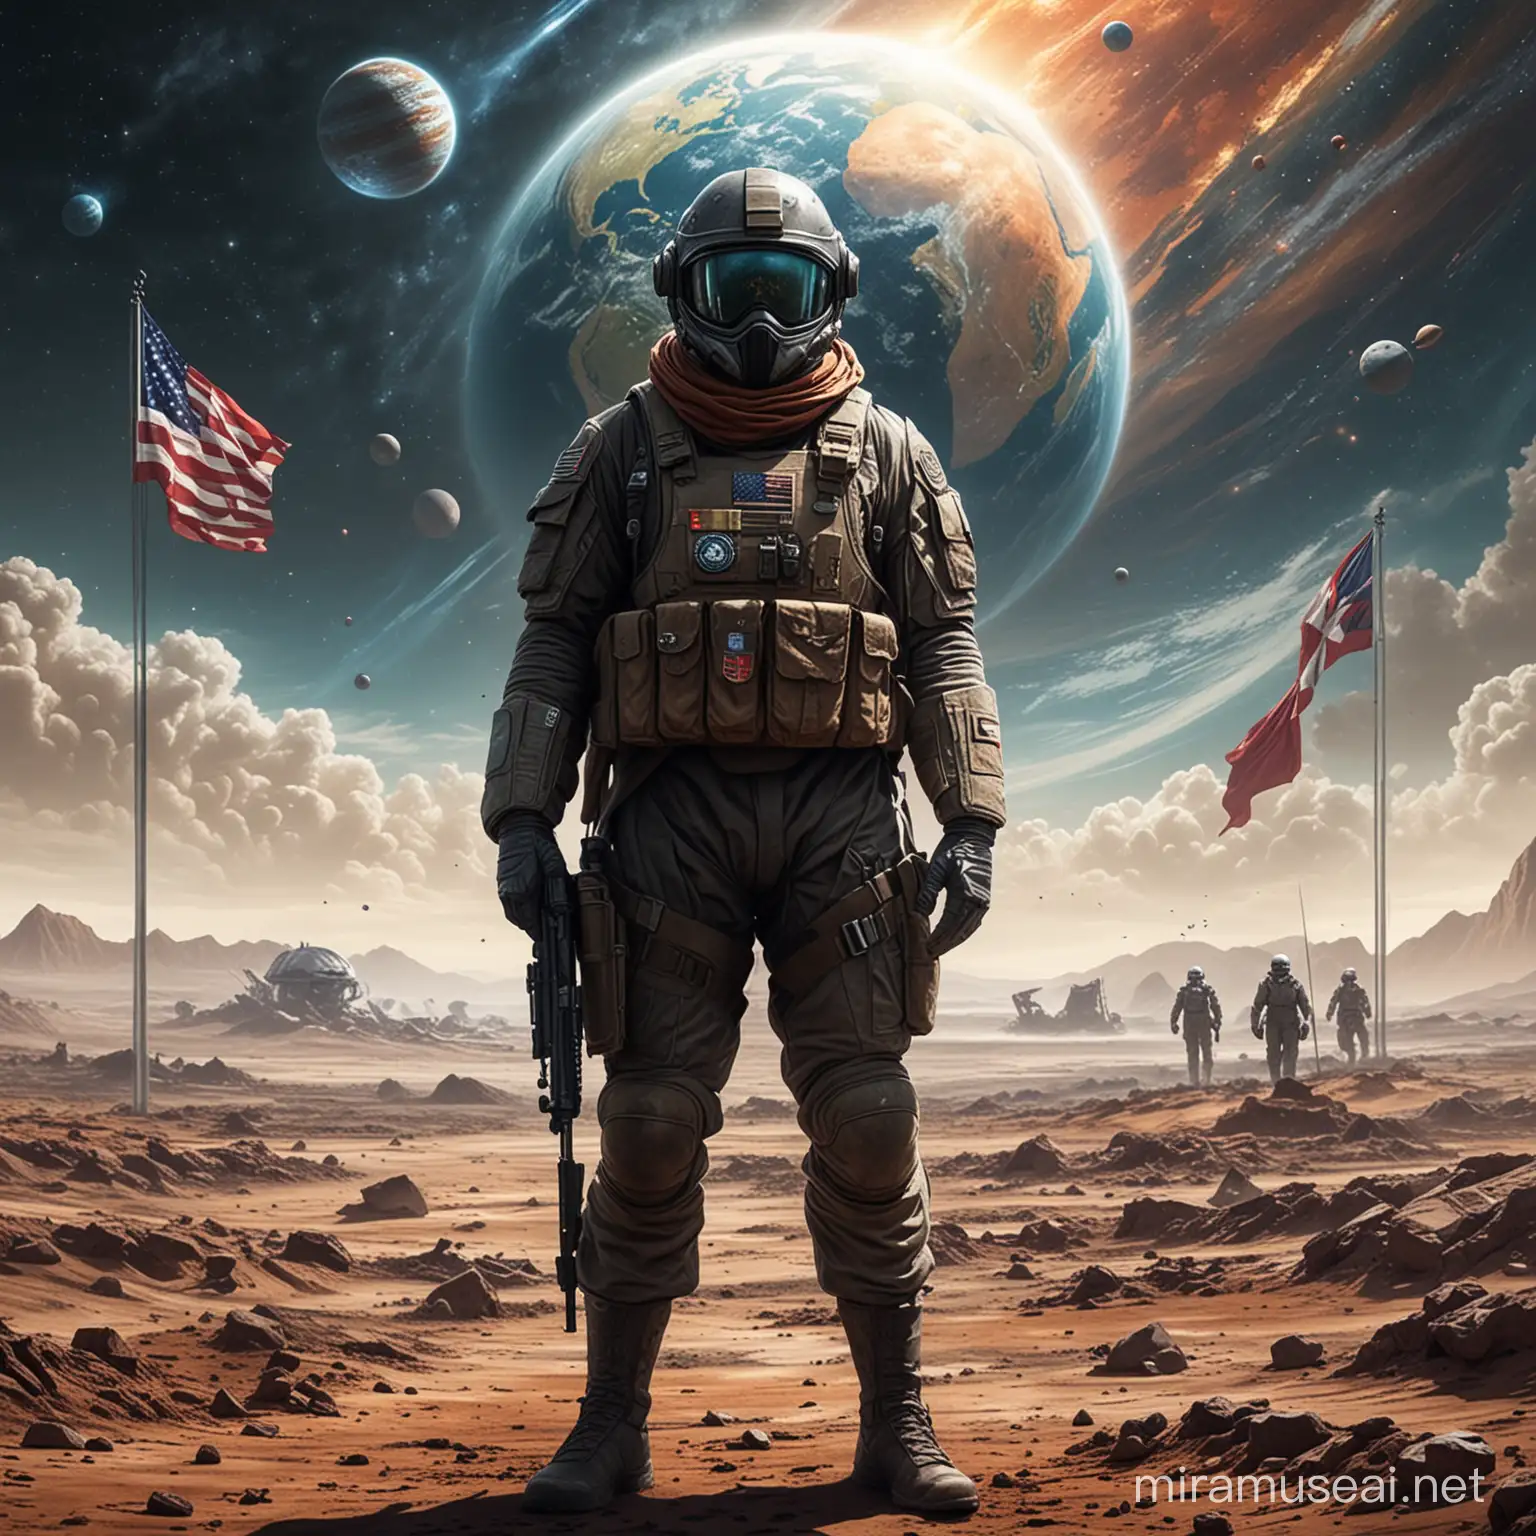 Military Space Soldier Overlooking Battle with Super Earth Flag